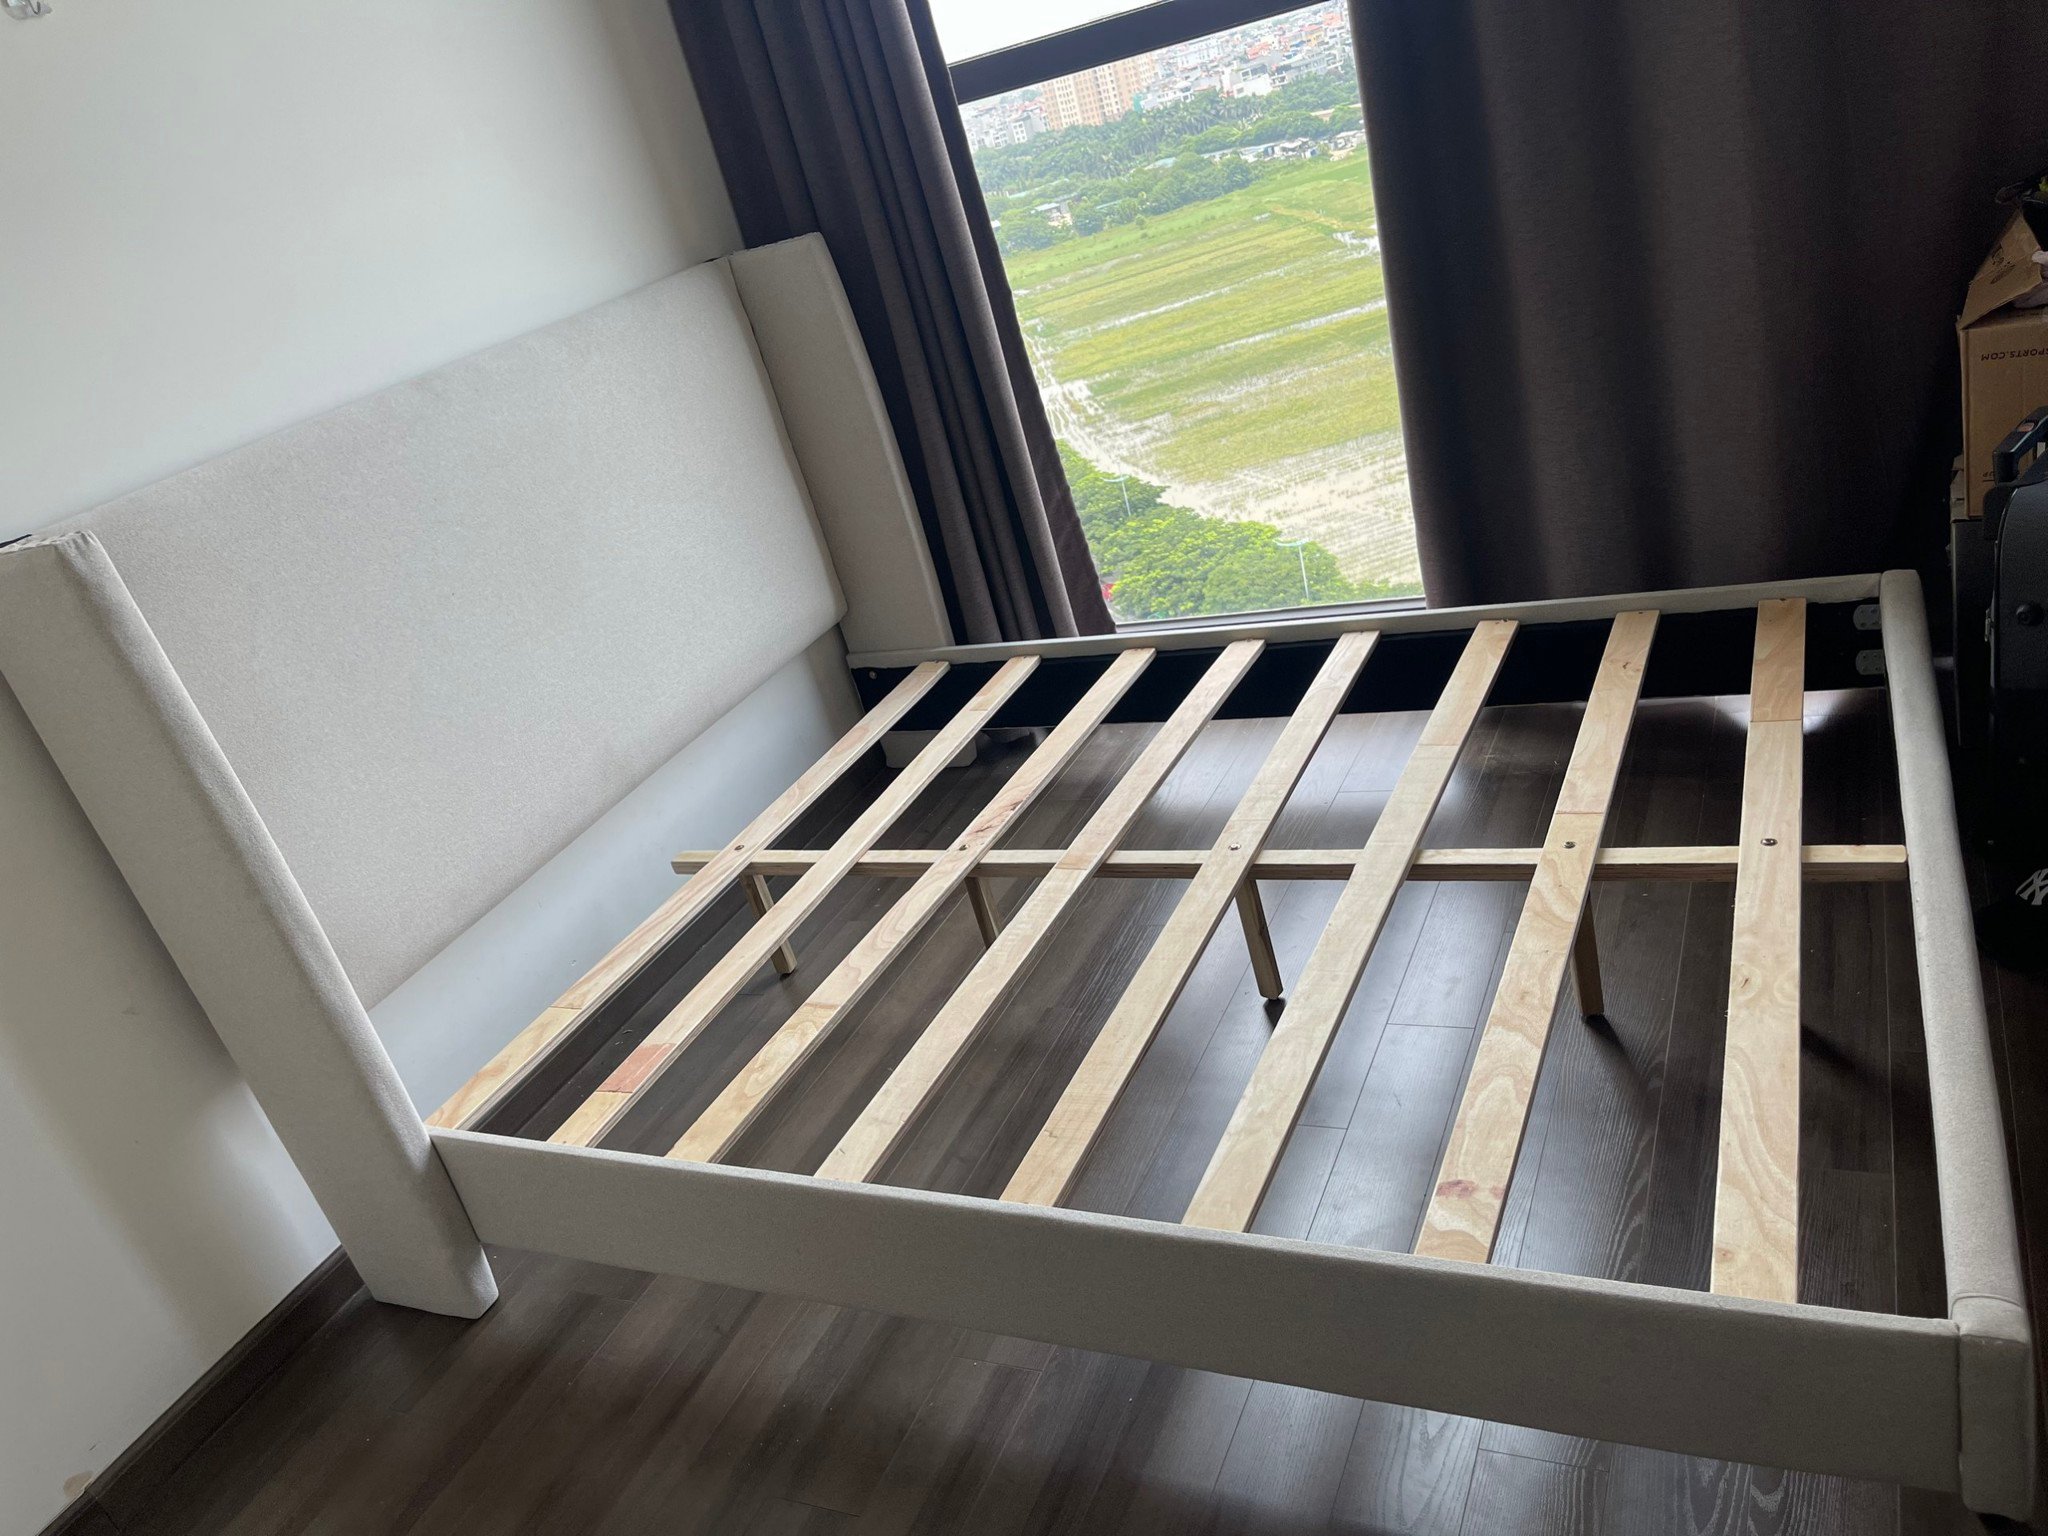 giường-ngủ-xdaily-bed-g2 (4)